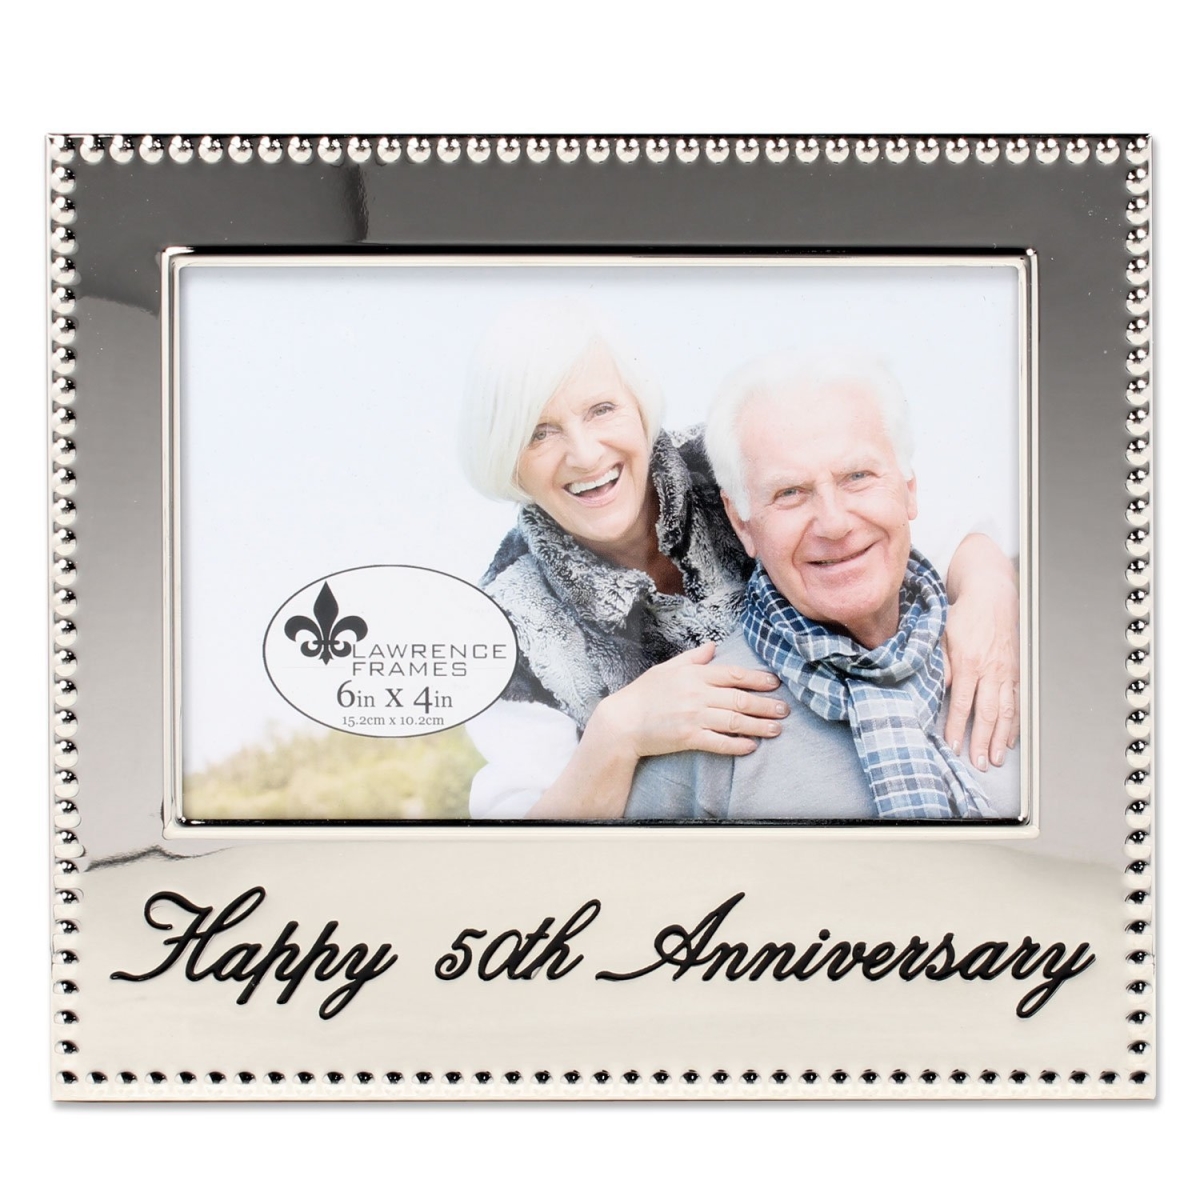 Picture of LawrenceFrames 290164 4 x 6 in. Happy 50th Anniversary Picture Frame, Silver